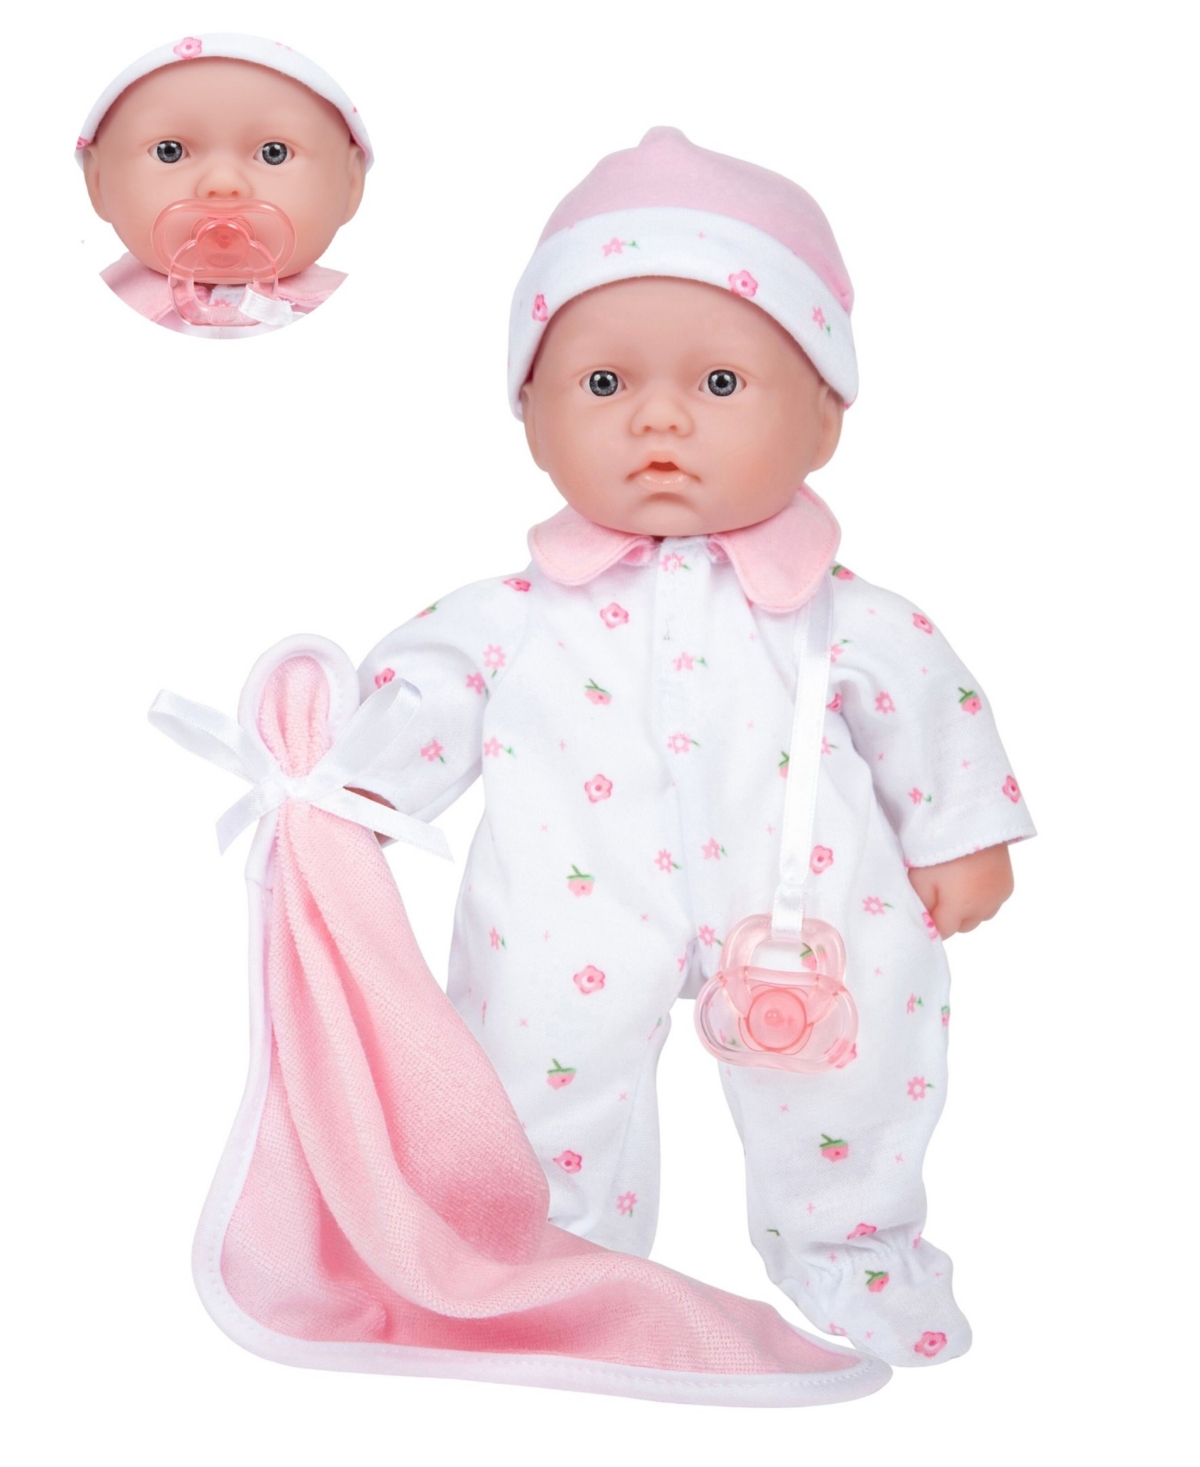 Jc Toys La Baby Caucasian 11" Soft Body Baby Doll Pink Outfit